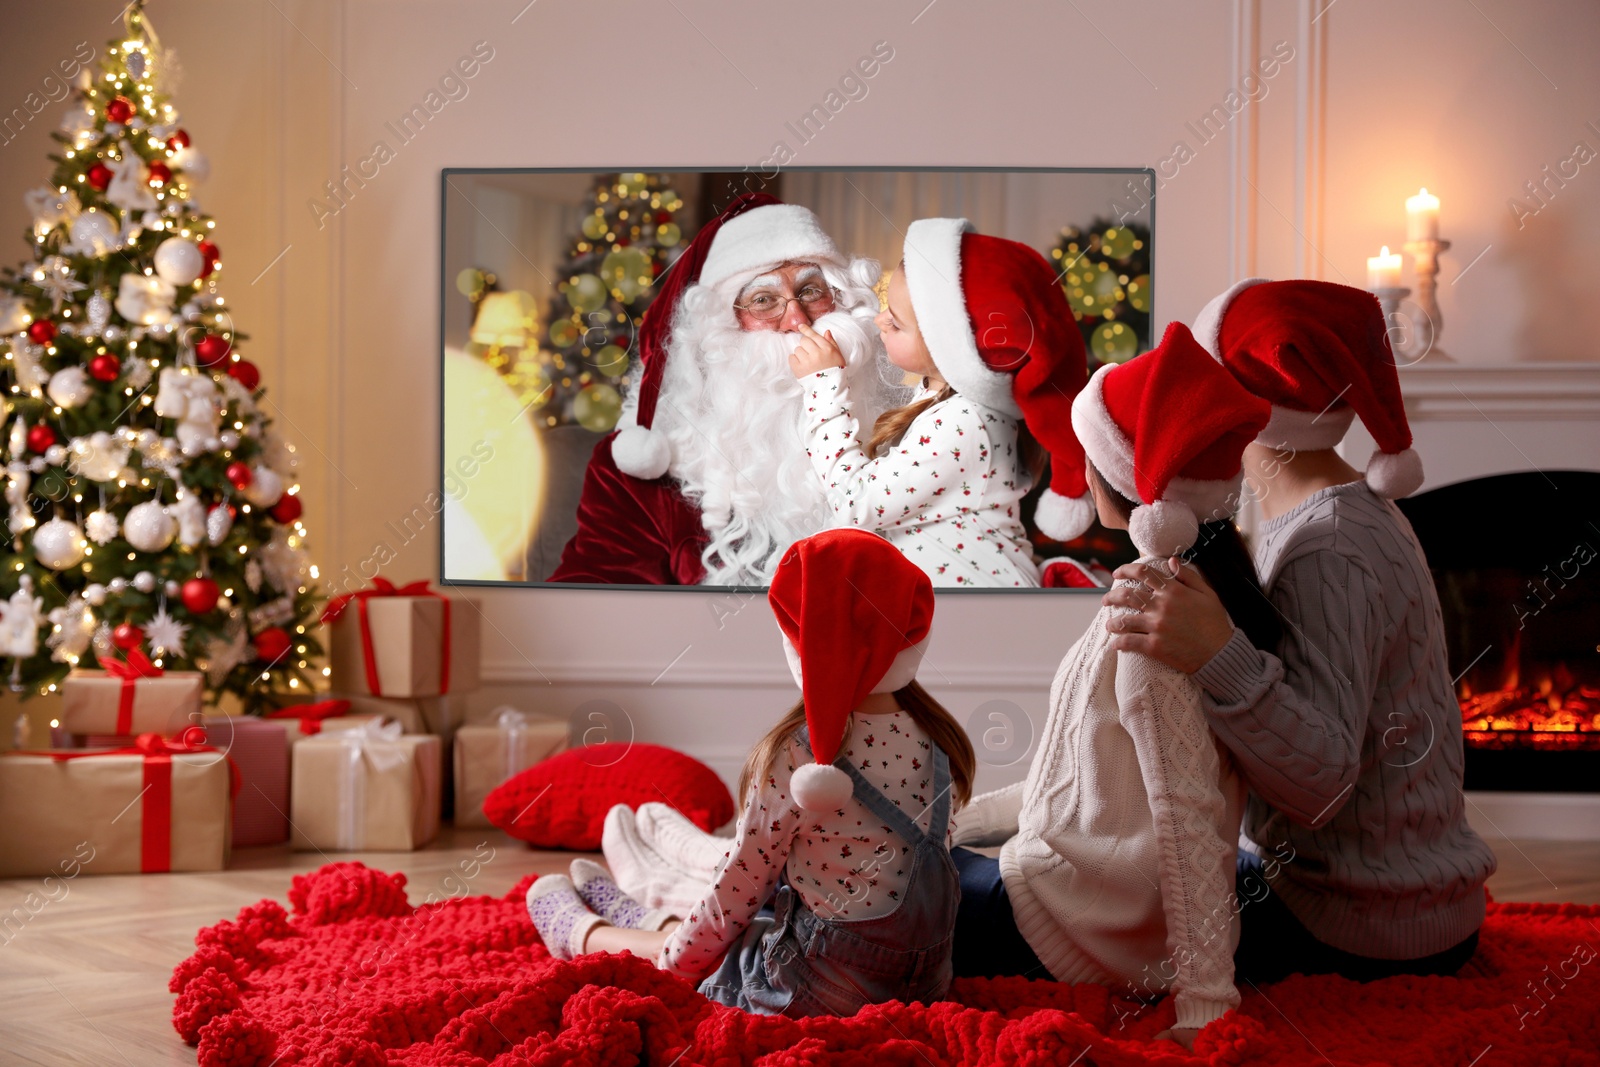 Image of Family watching TV movie in room decorated for Christmas